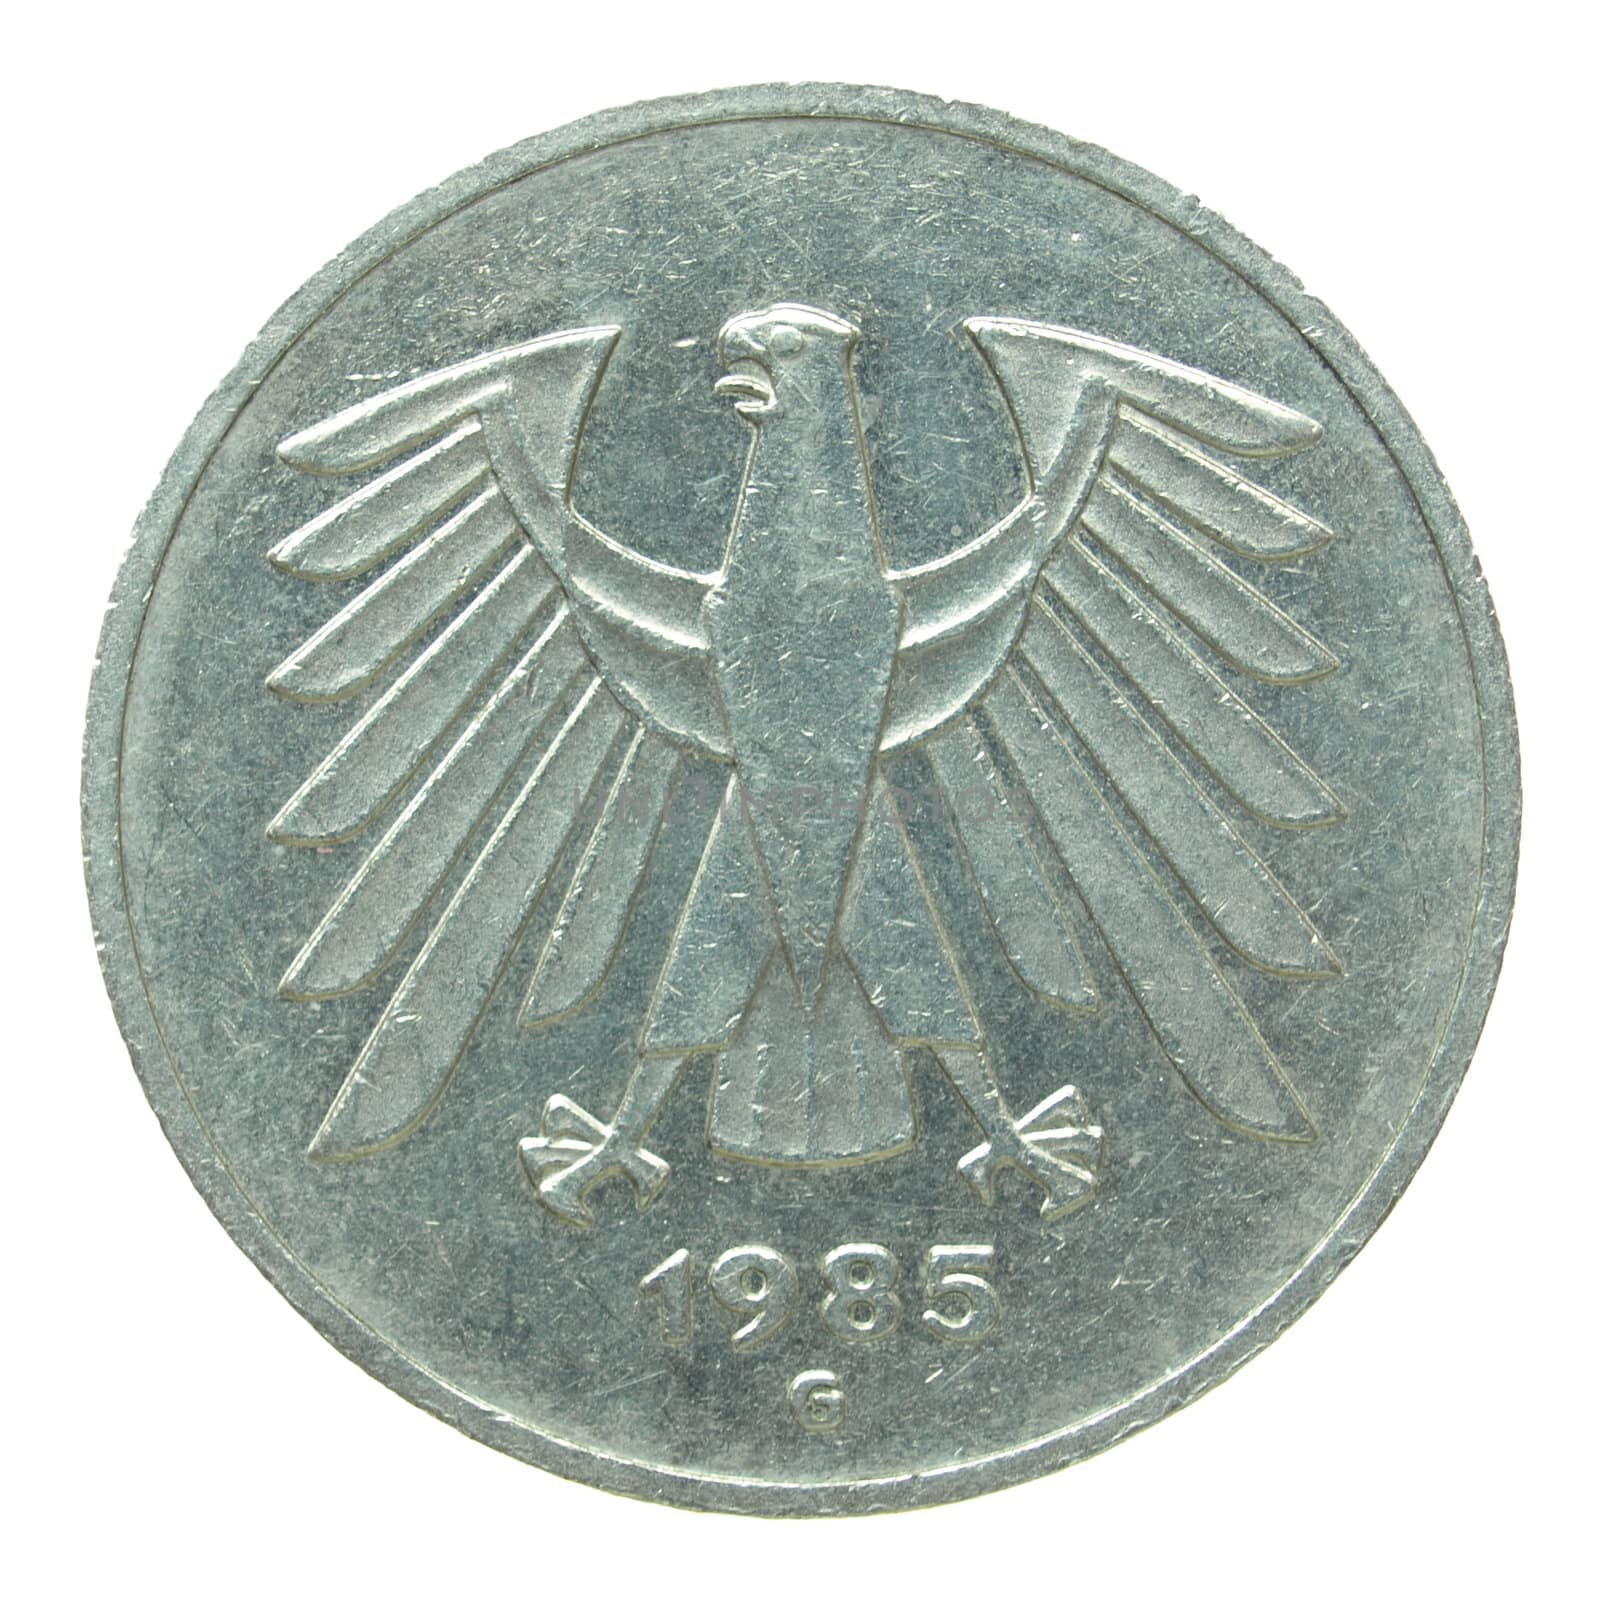 Vintage German coin isolated over a white background